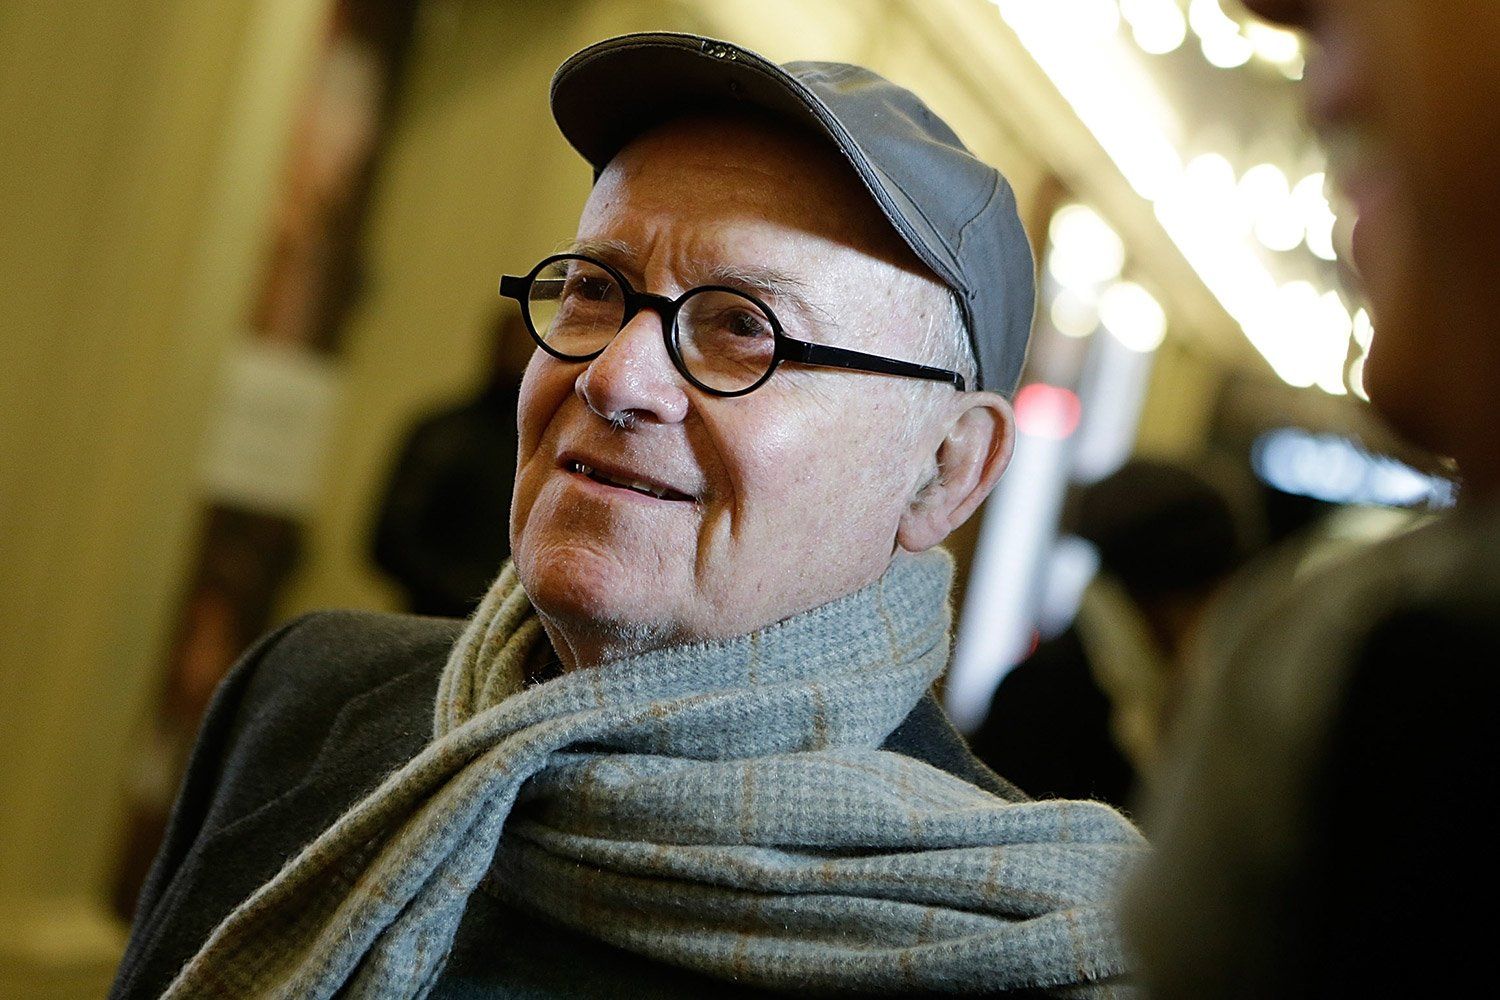 Patton Oswalt, Sarah Silverman, and more react to The Graduate writer Buck Henry’s death